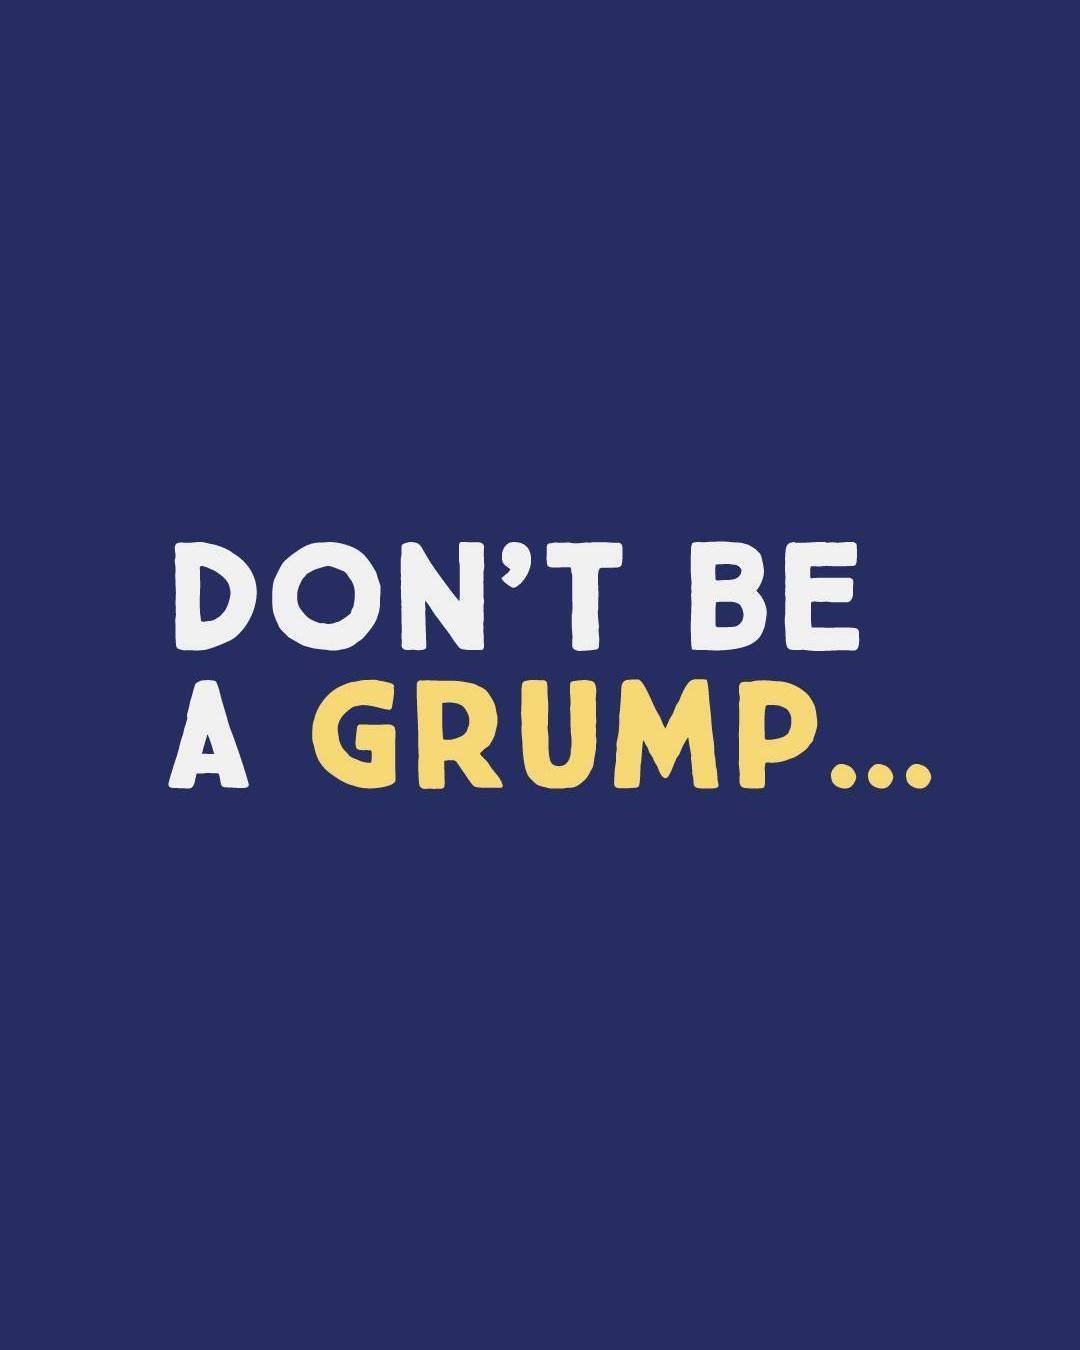 Swipe through to discover how to avoid being a grump and spread joy instead! 🌟